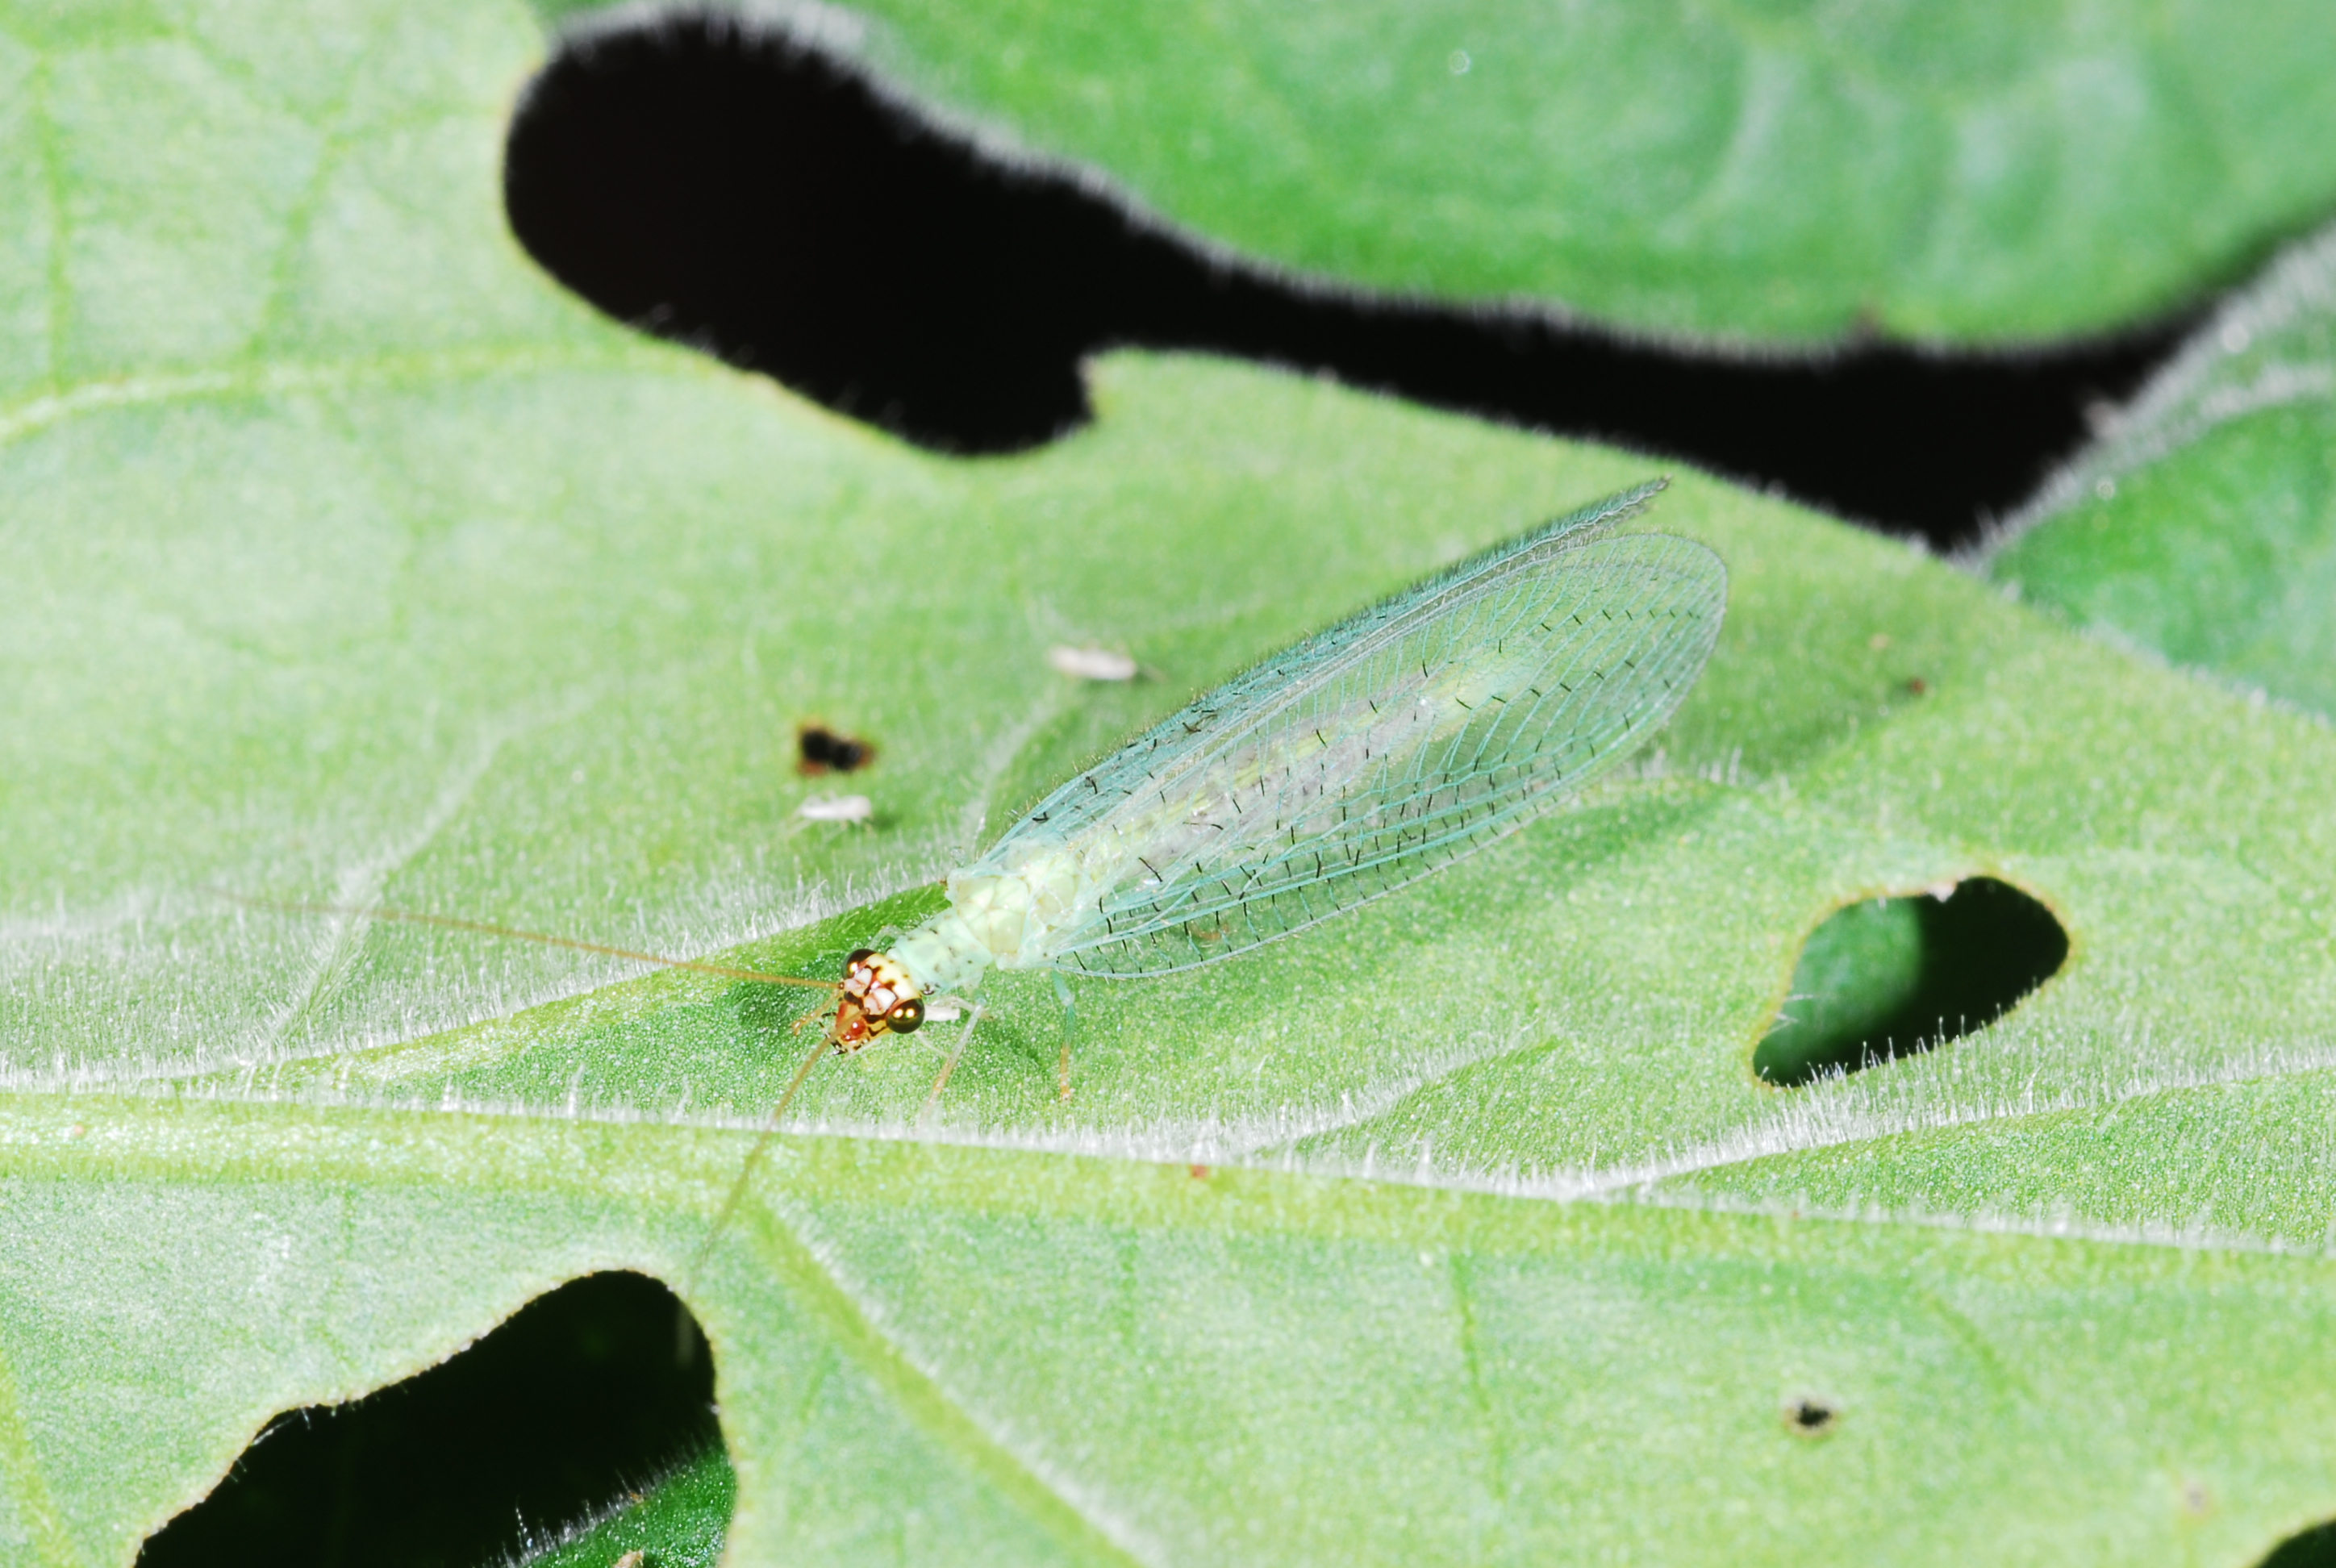 Adults of some species of lacewings feed on aphids prior to laying eggs.